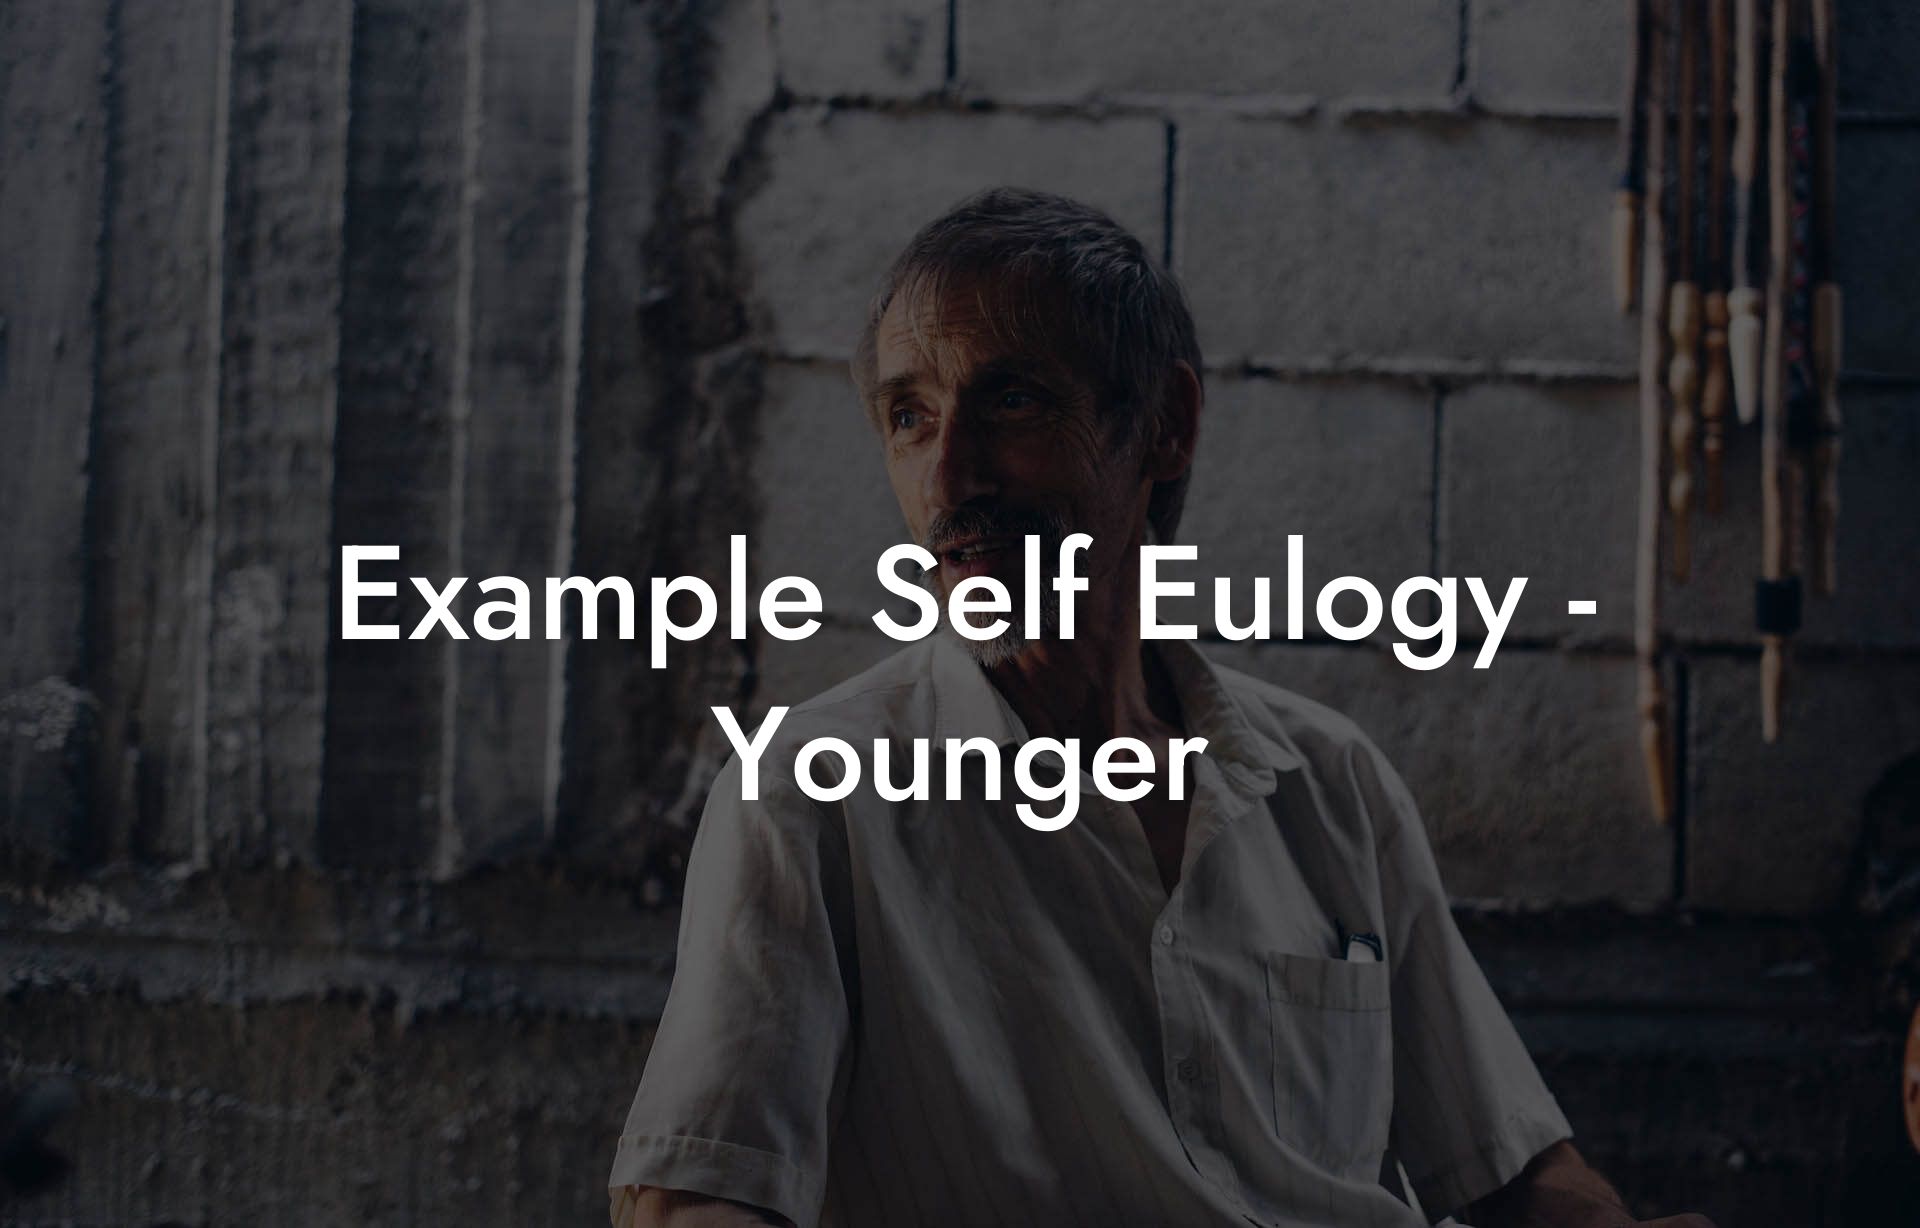 Example Self Eulogy - Younger